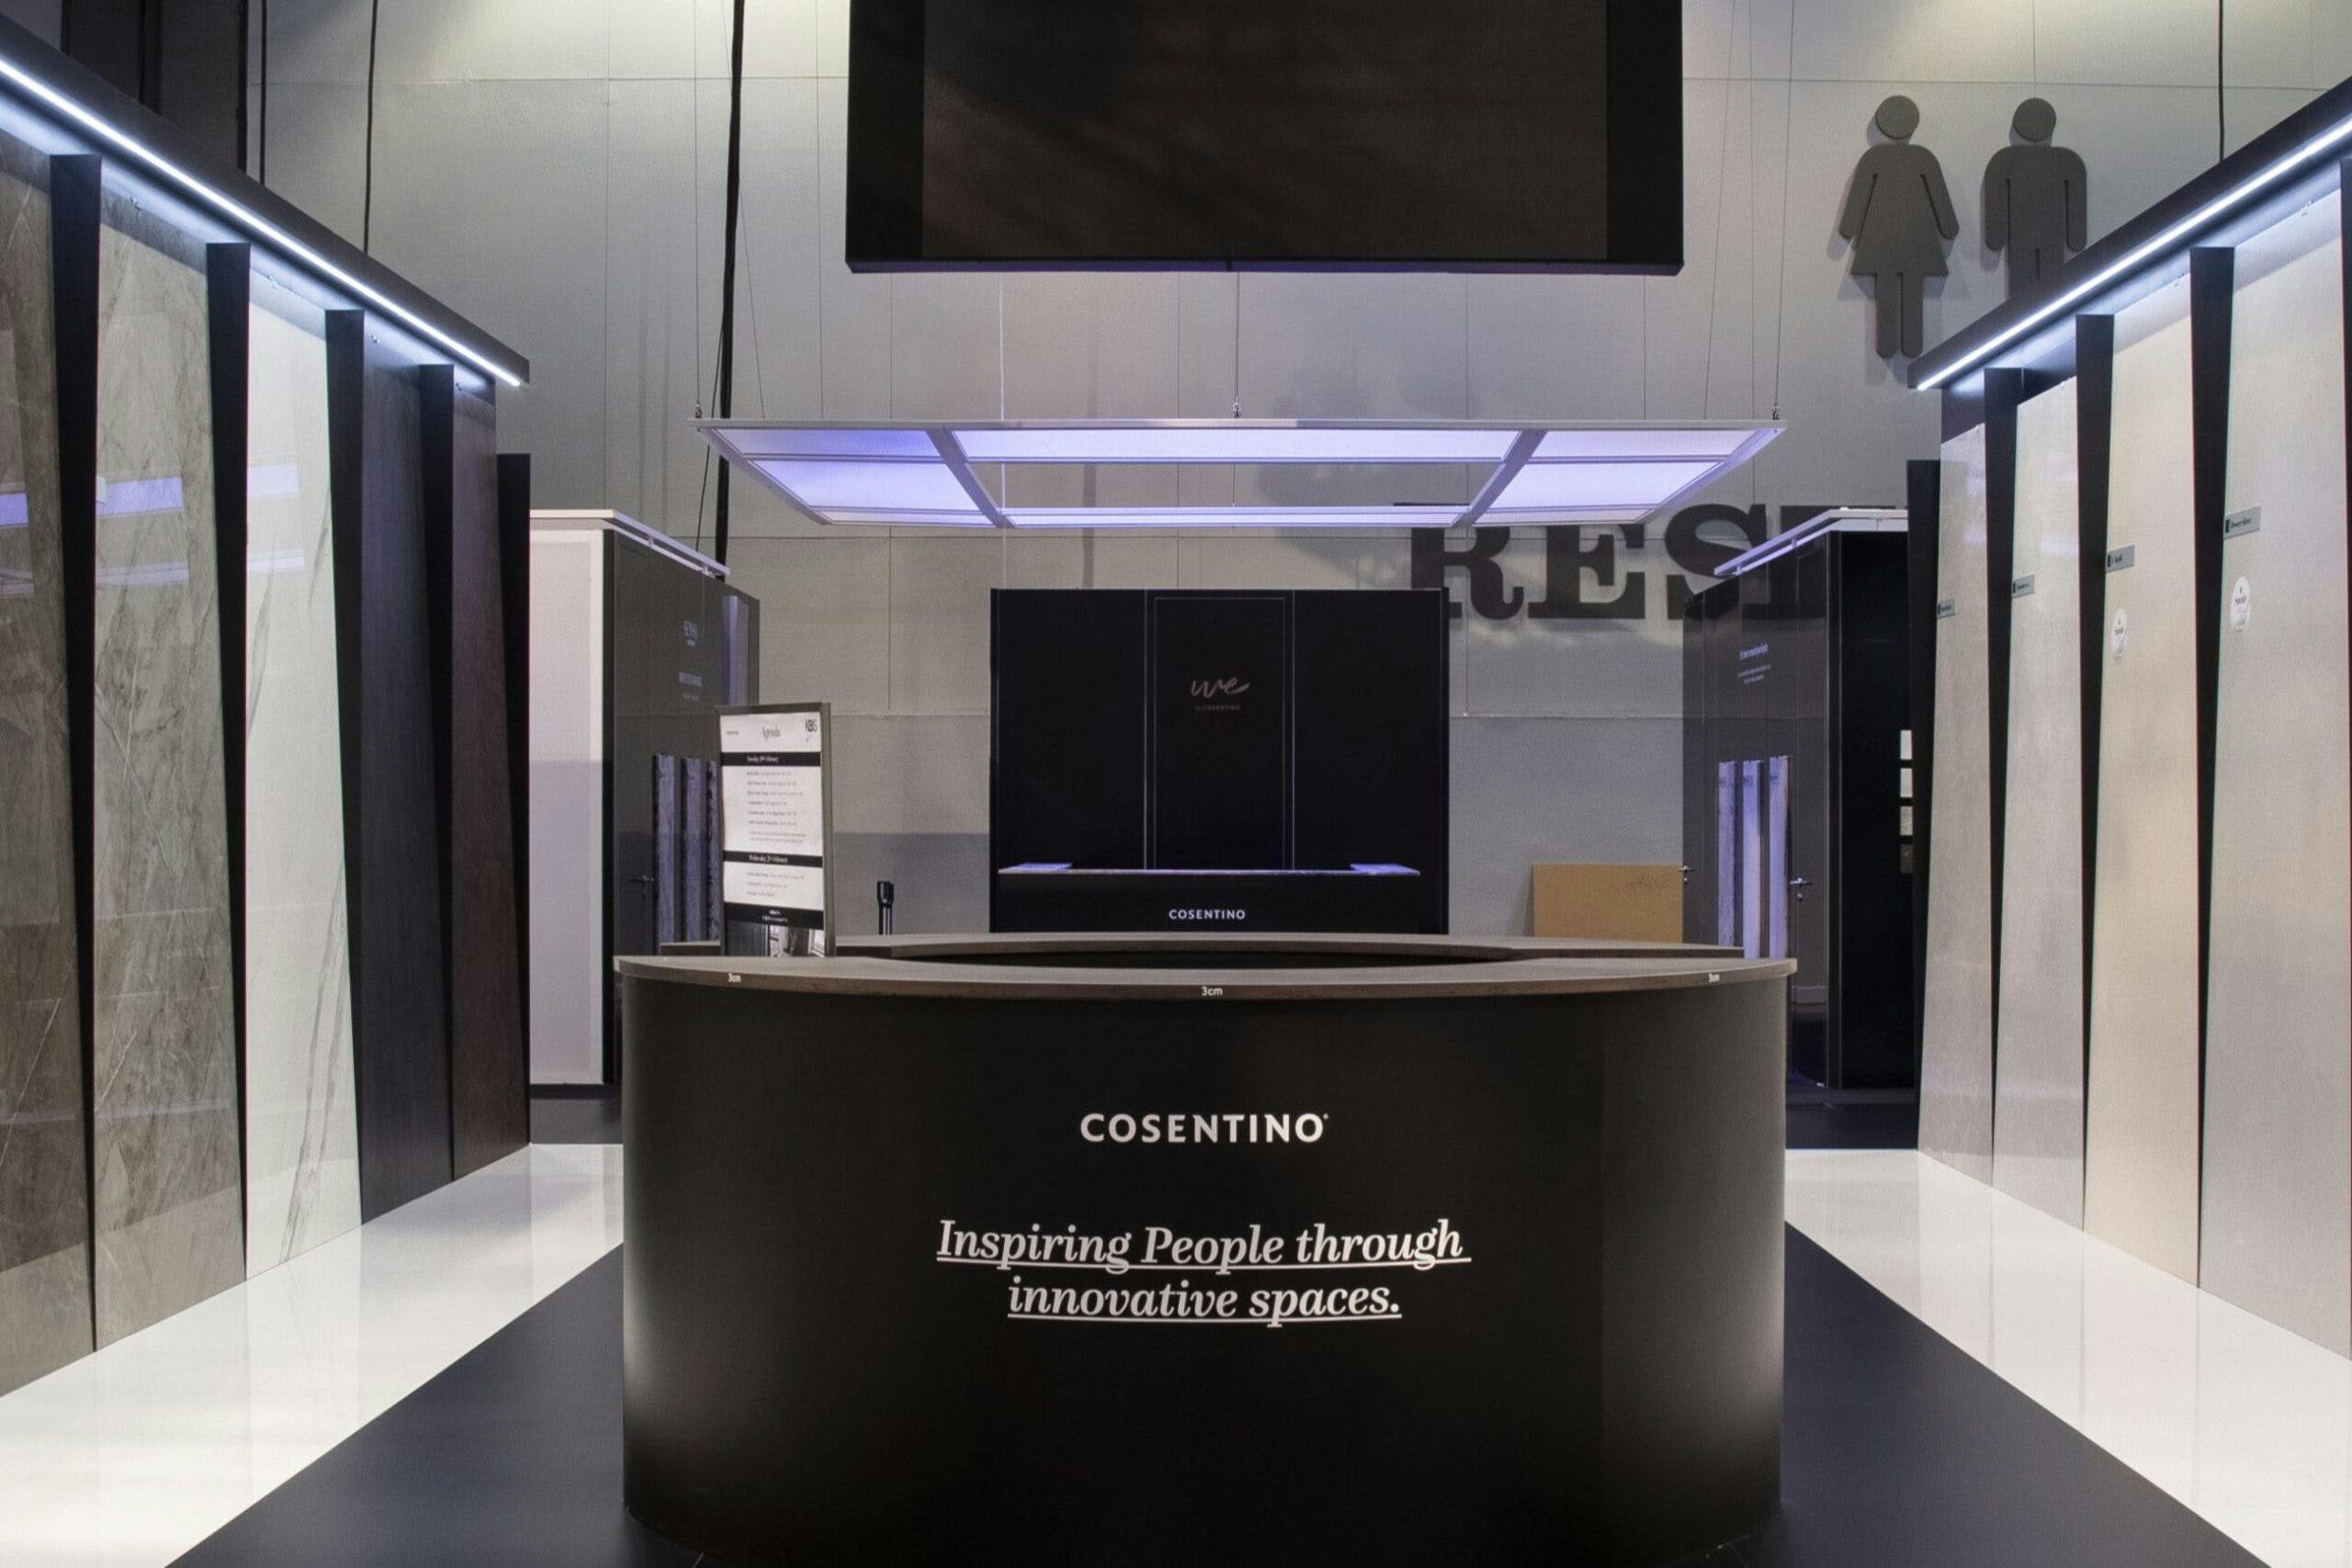 Image 32 of Stand Cosentino en KBIS 2019 baja 1 scaled in Cosentino at KBIS 2019 - Cosentino